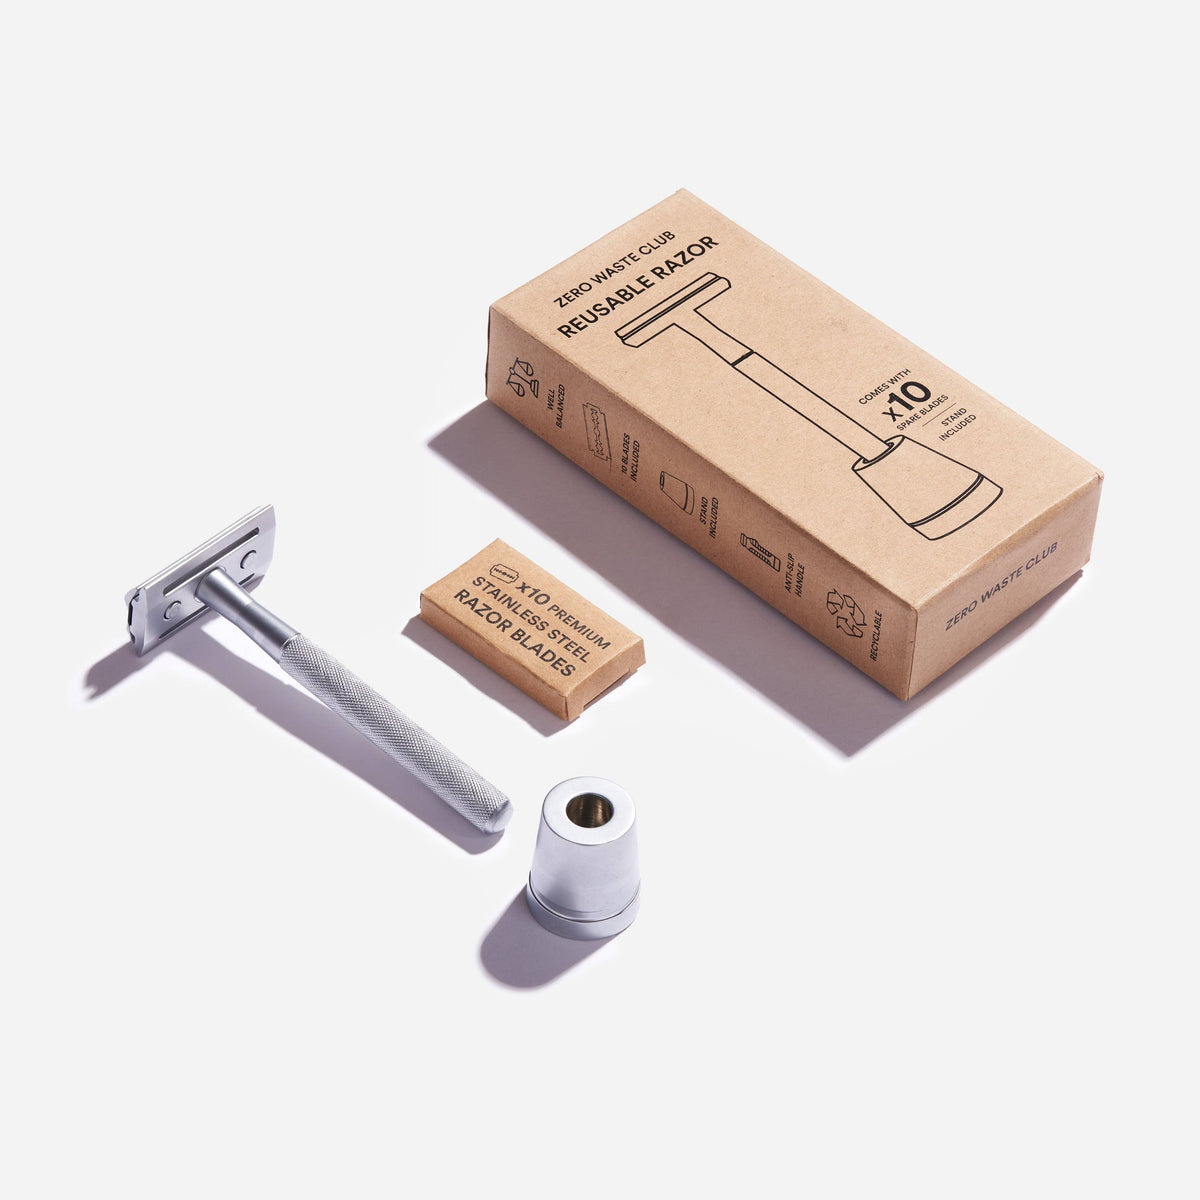 Zero Waste Club - Reusable Safety Razor with Stand - 10 Blades Included: Blush Wine